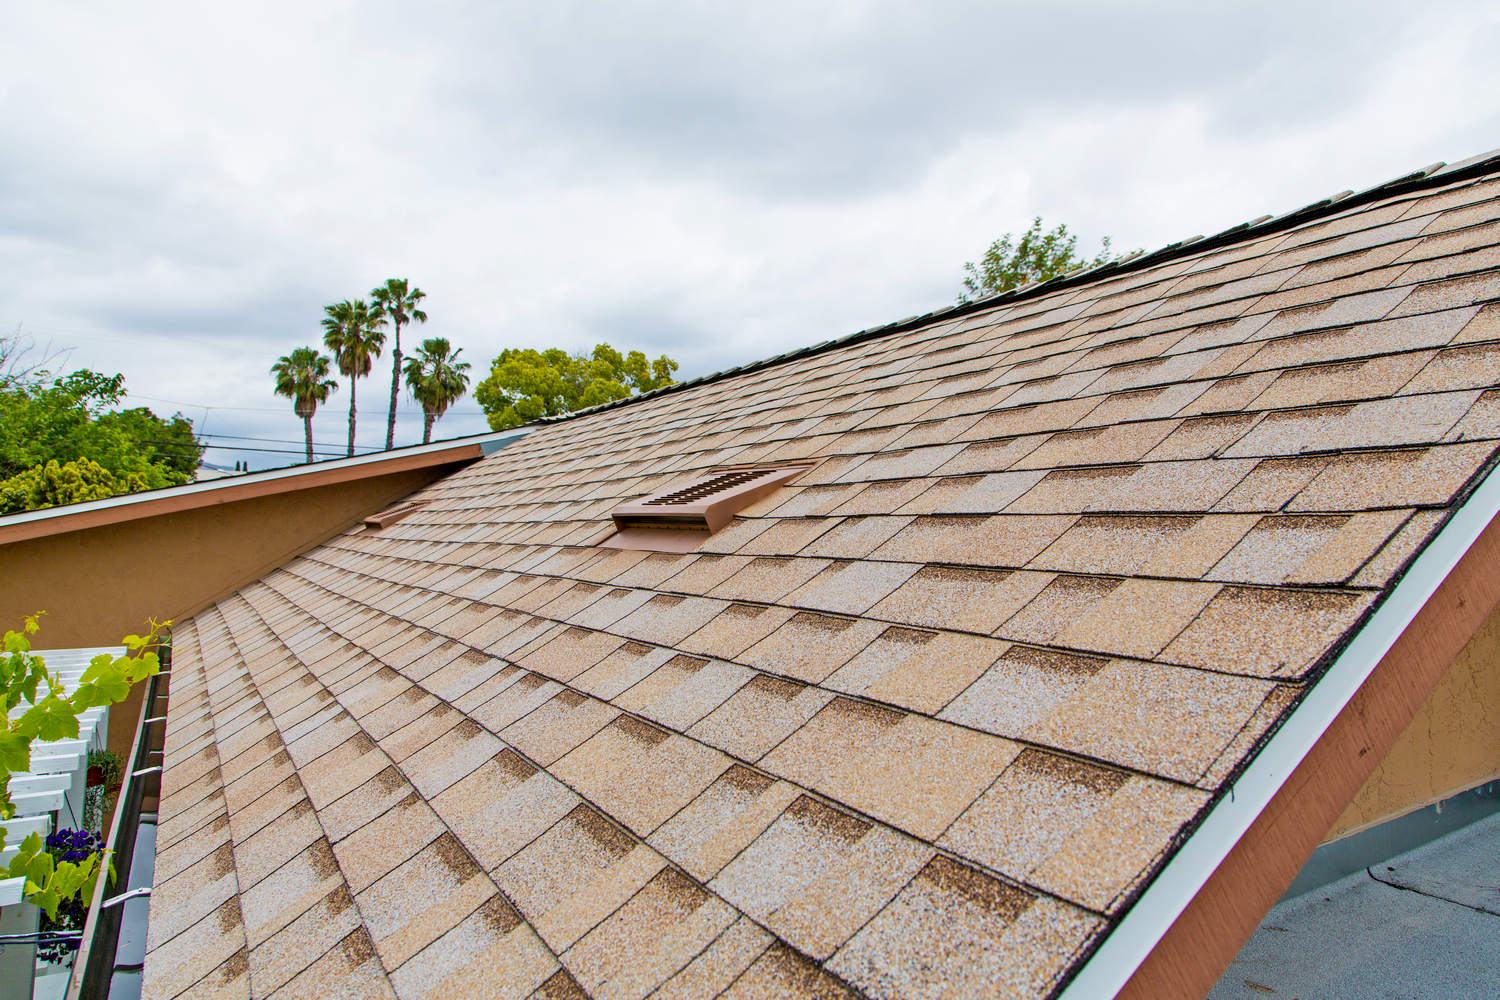 Roofing and gutter Replacement in El Cajon (6)